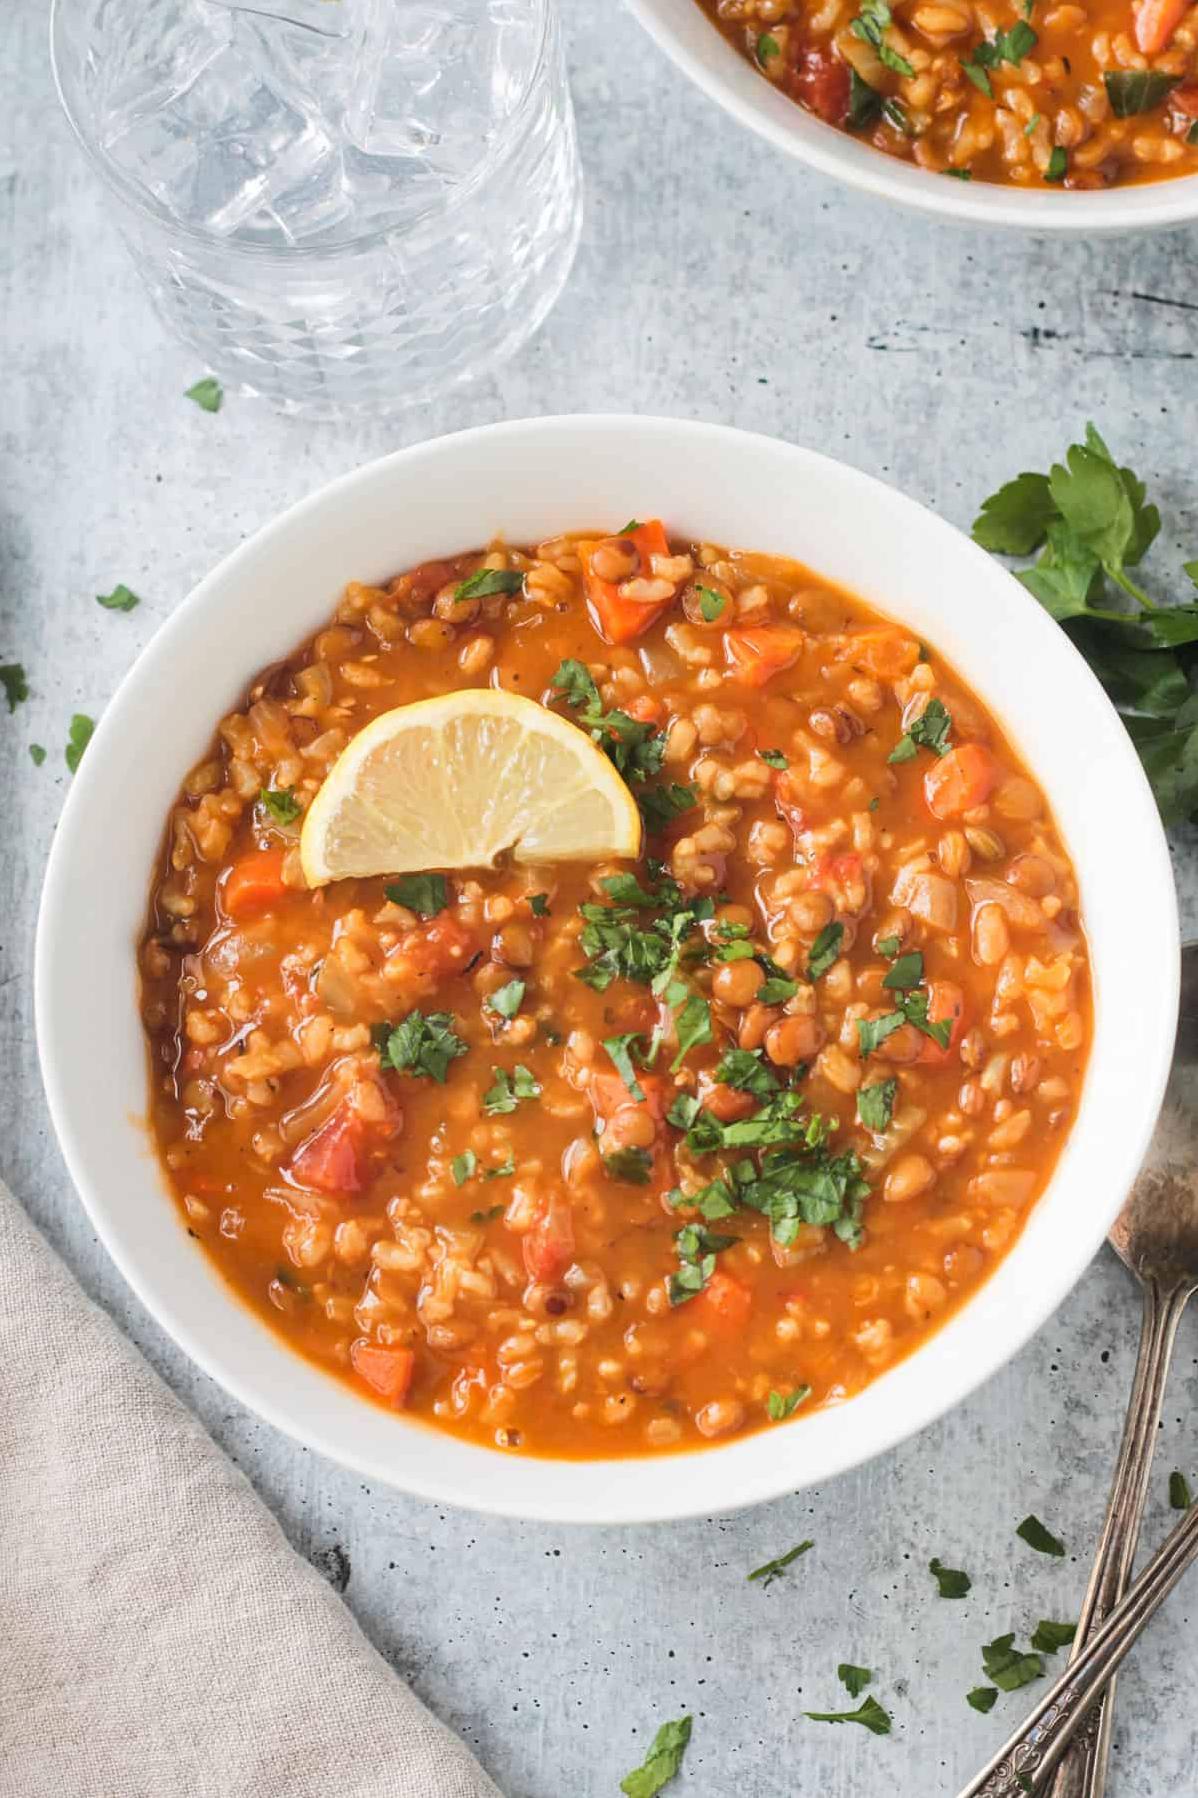  This vegan lentil soup with red yeast rice is filling and satisfying